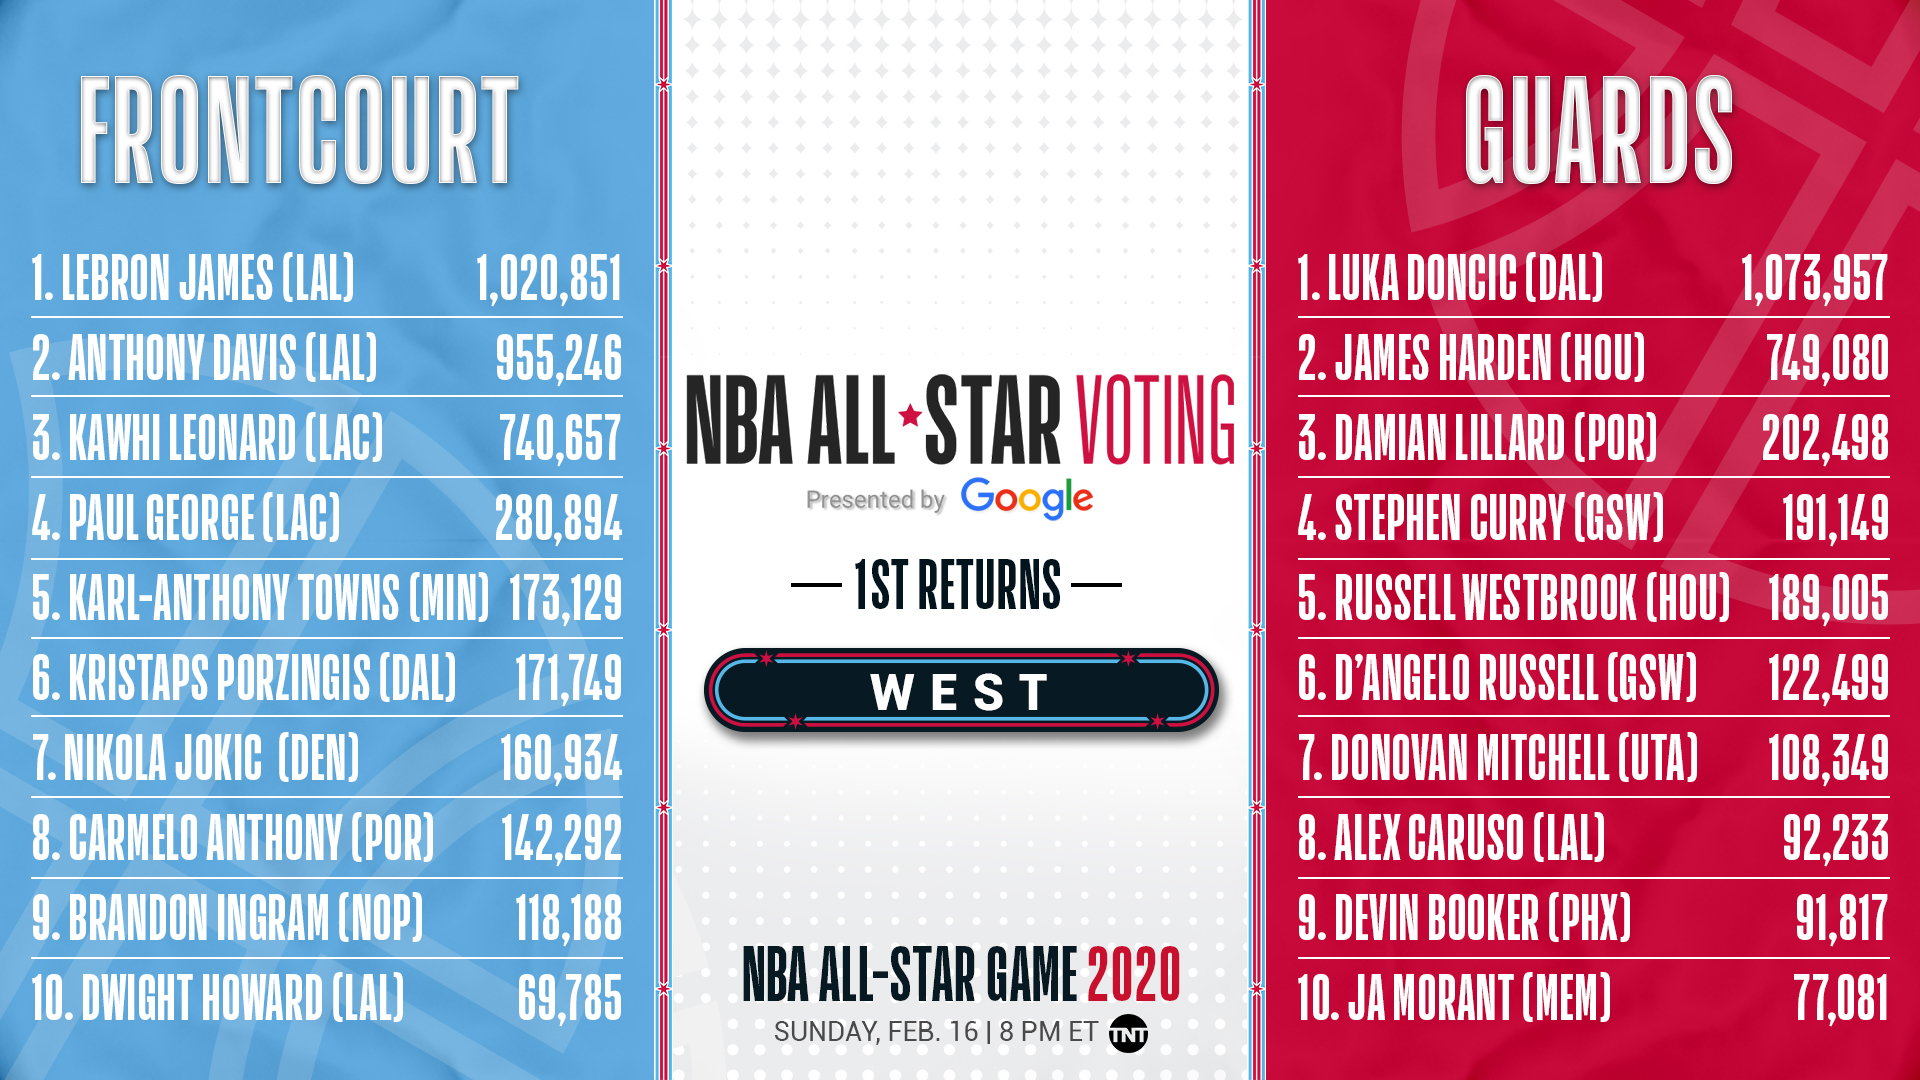 2020 NBA All-Star Game - LAST 5 MINUTES 